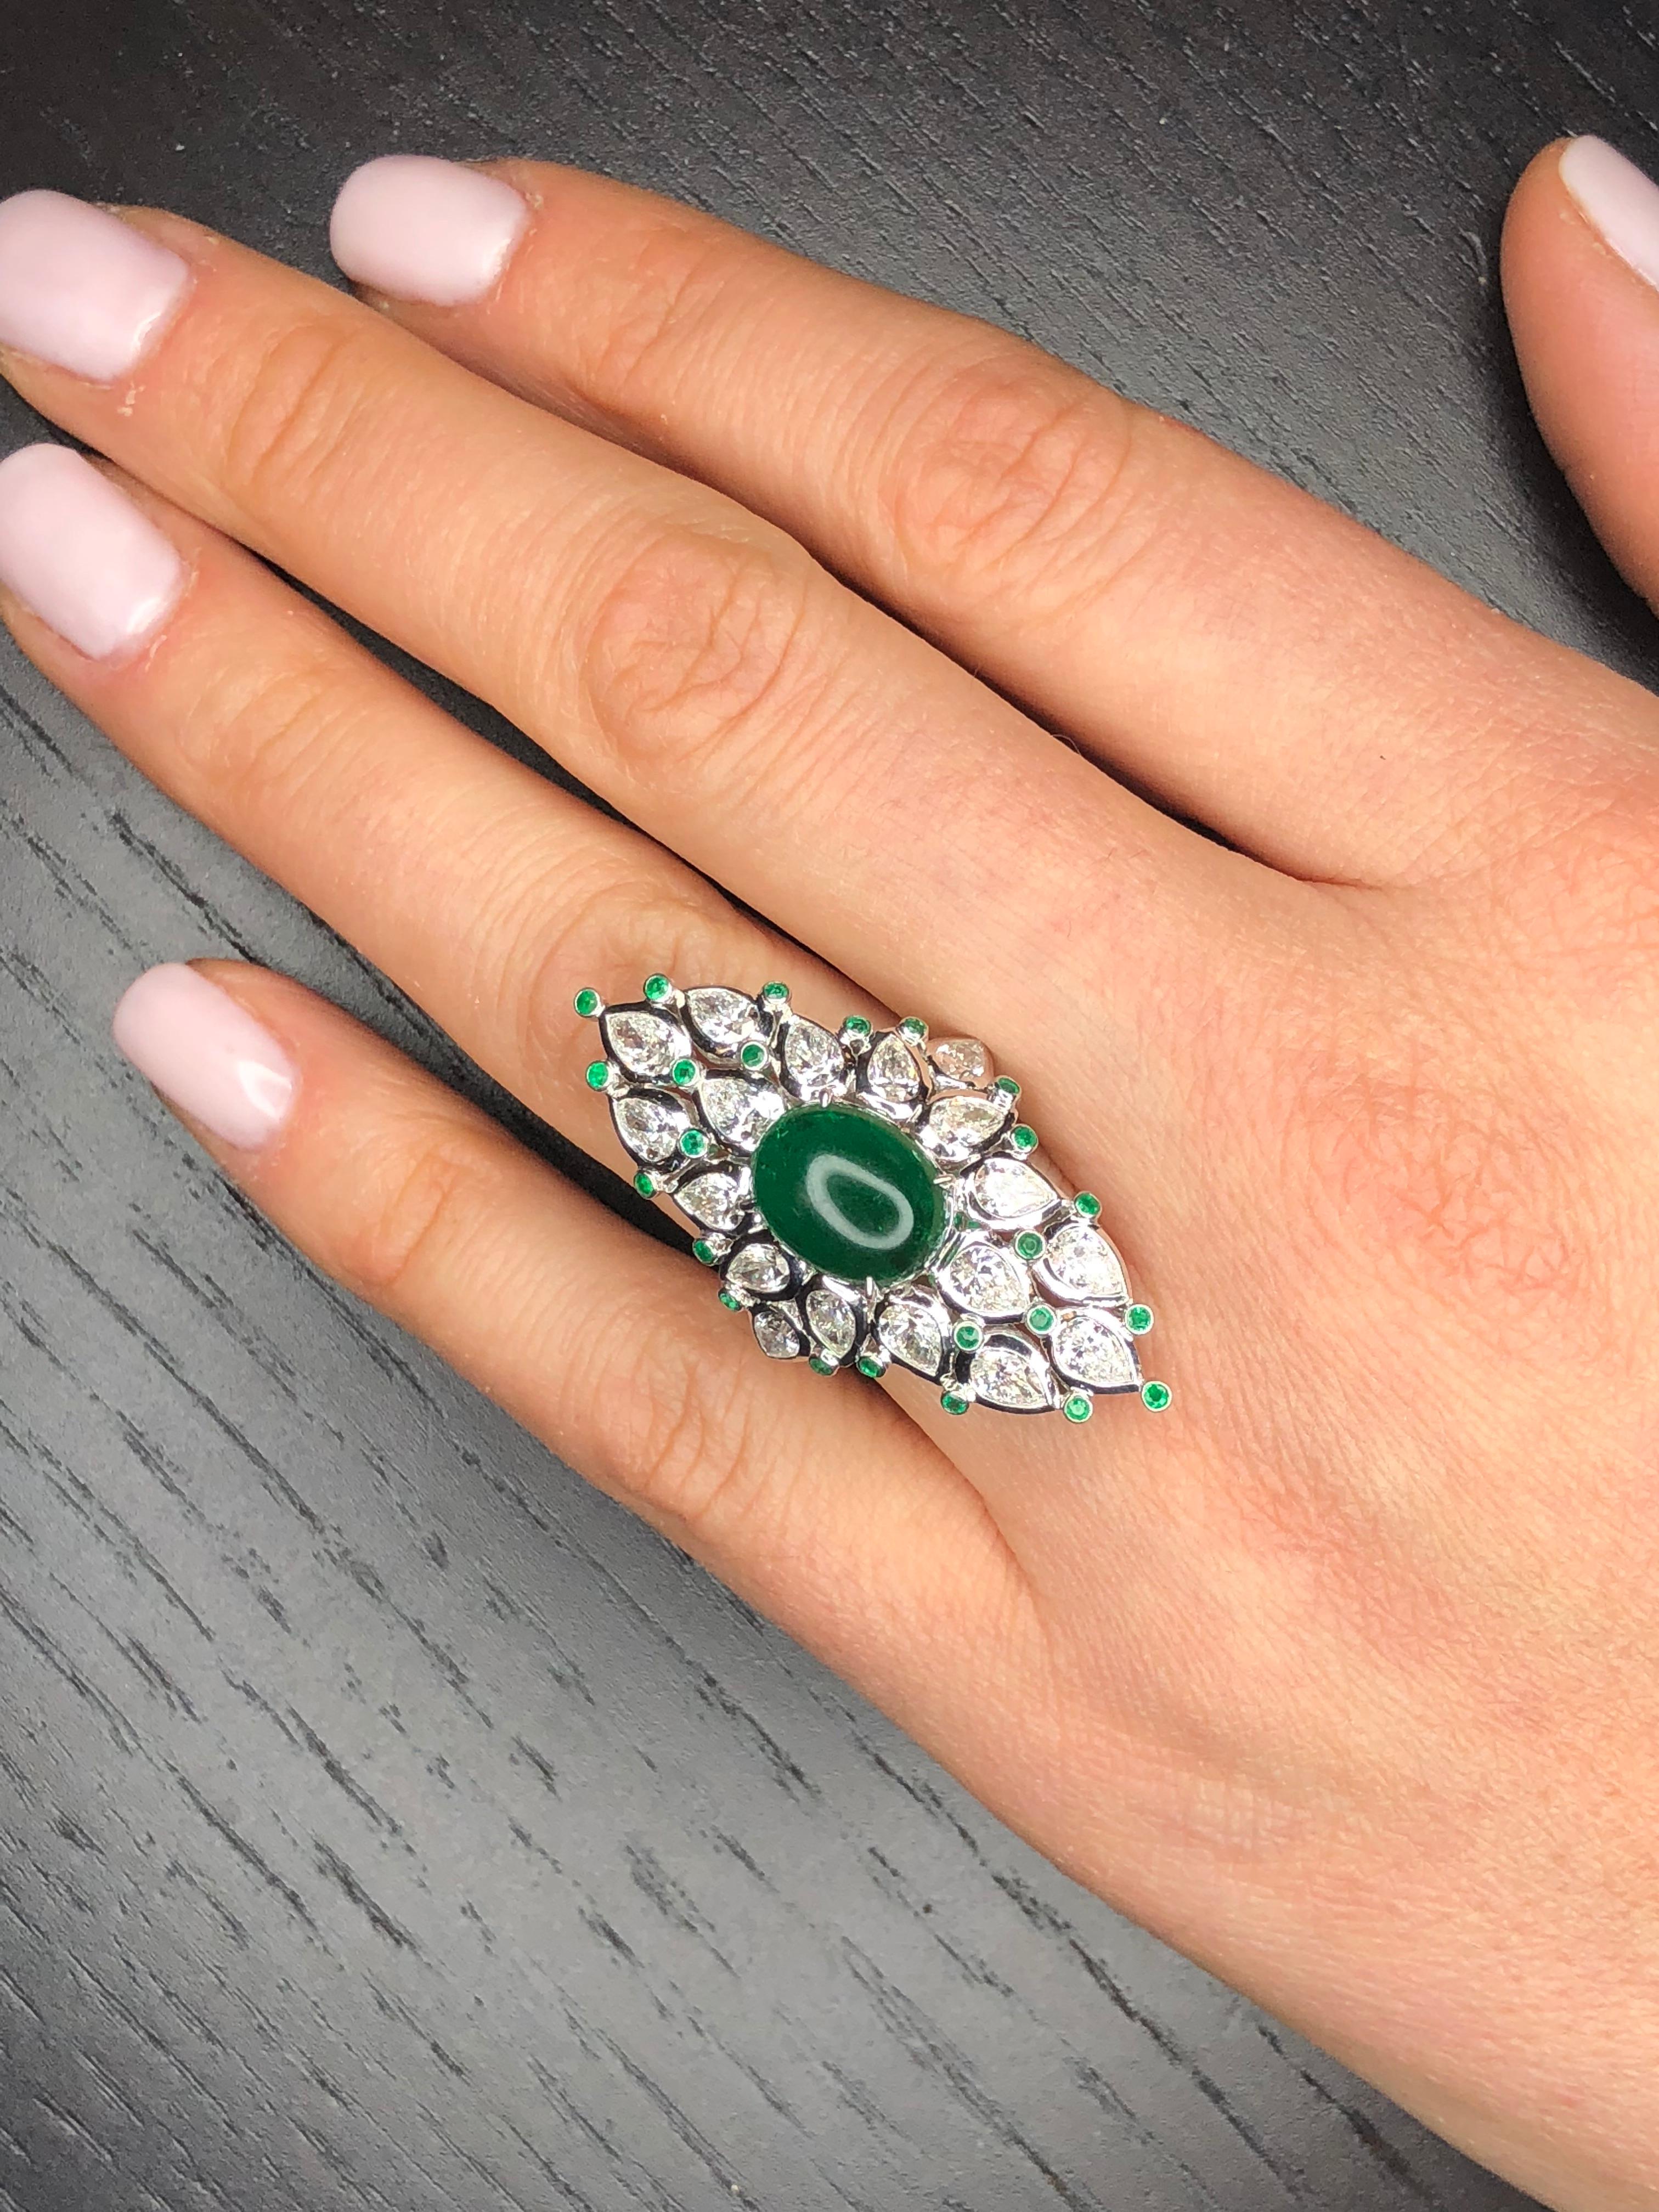 A beautiful Natural Green Cabochon Emerald, 2.90 carats, surrounded by 4.55 carats Total Weight Pear Shape Diamonds, all G/H Color VS Clarity set in 18k White Gold. The ring is currently a size 6 but can be sized with our complimentary sizing